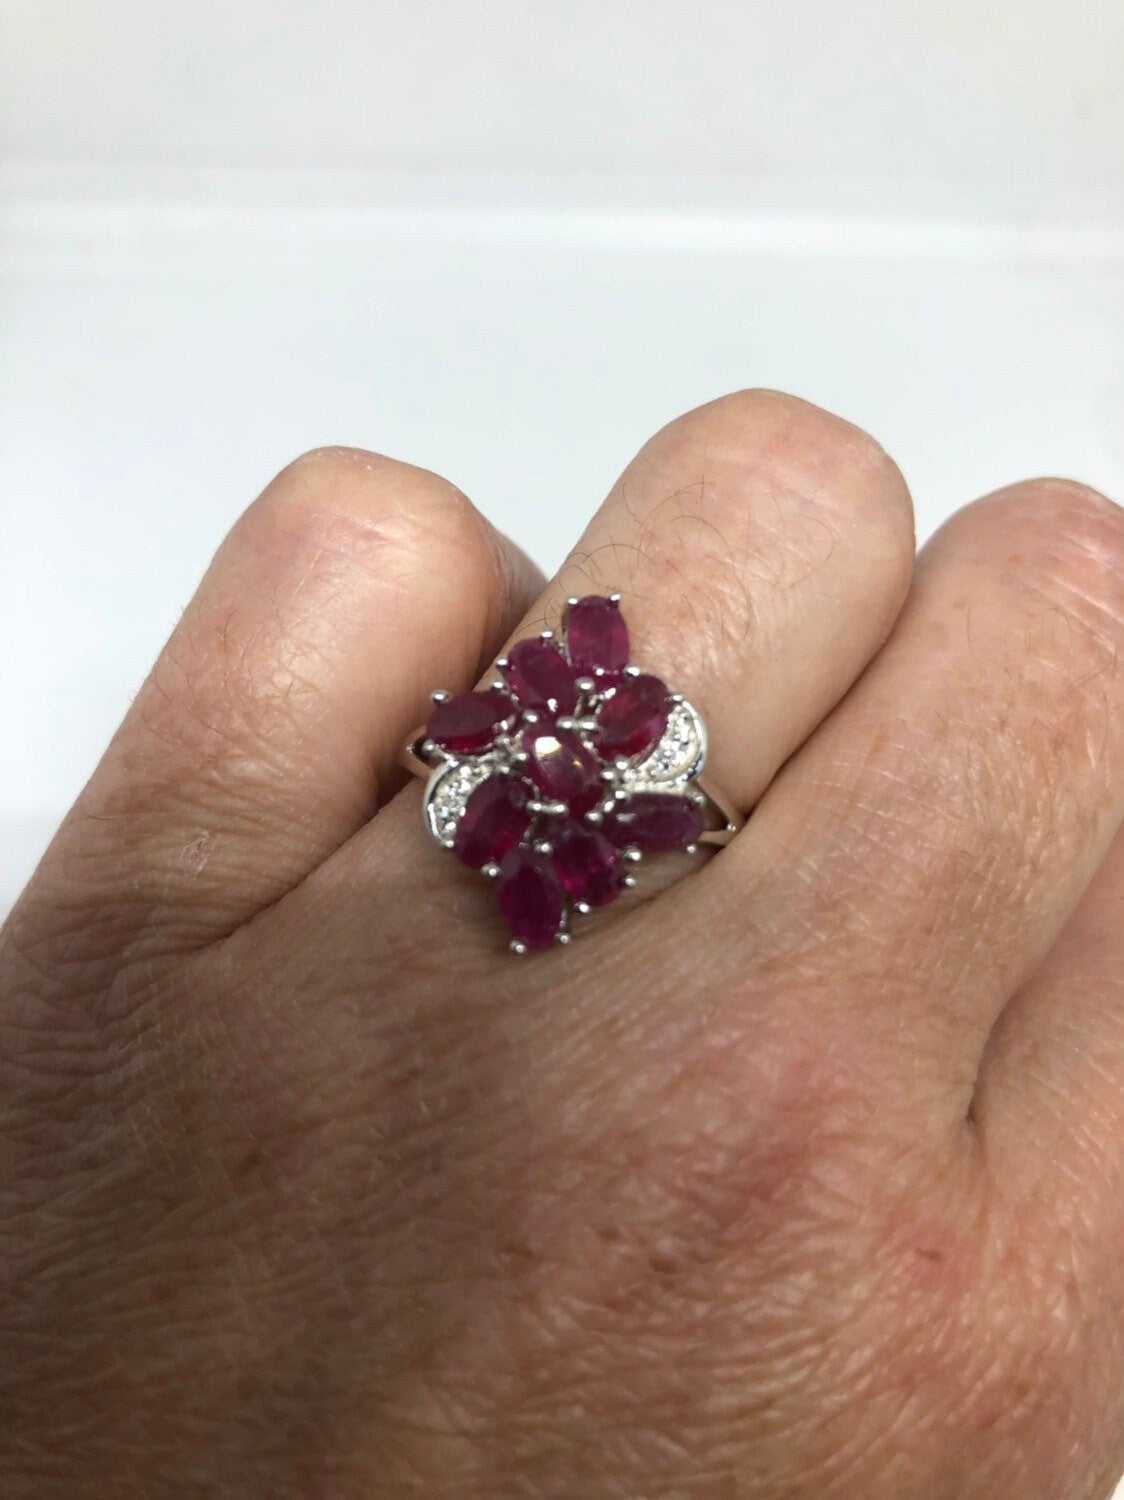 Vintage Handmade Pink Ruby Setting Sterling Silver Gothic Ring